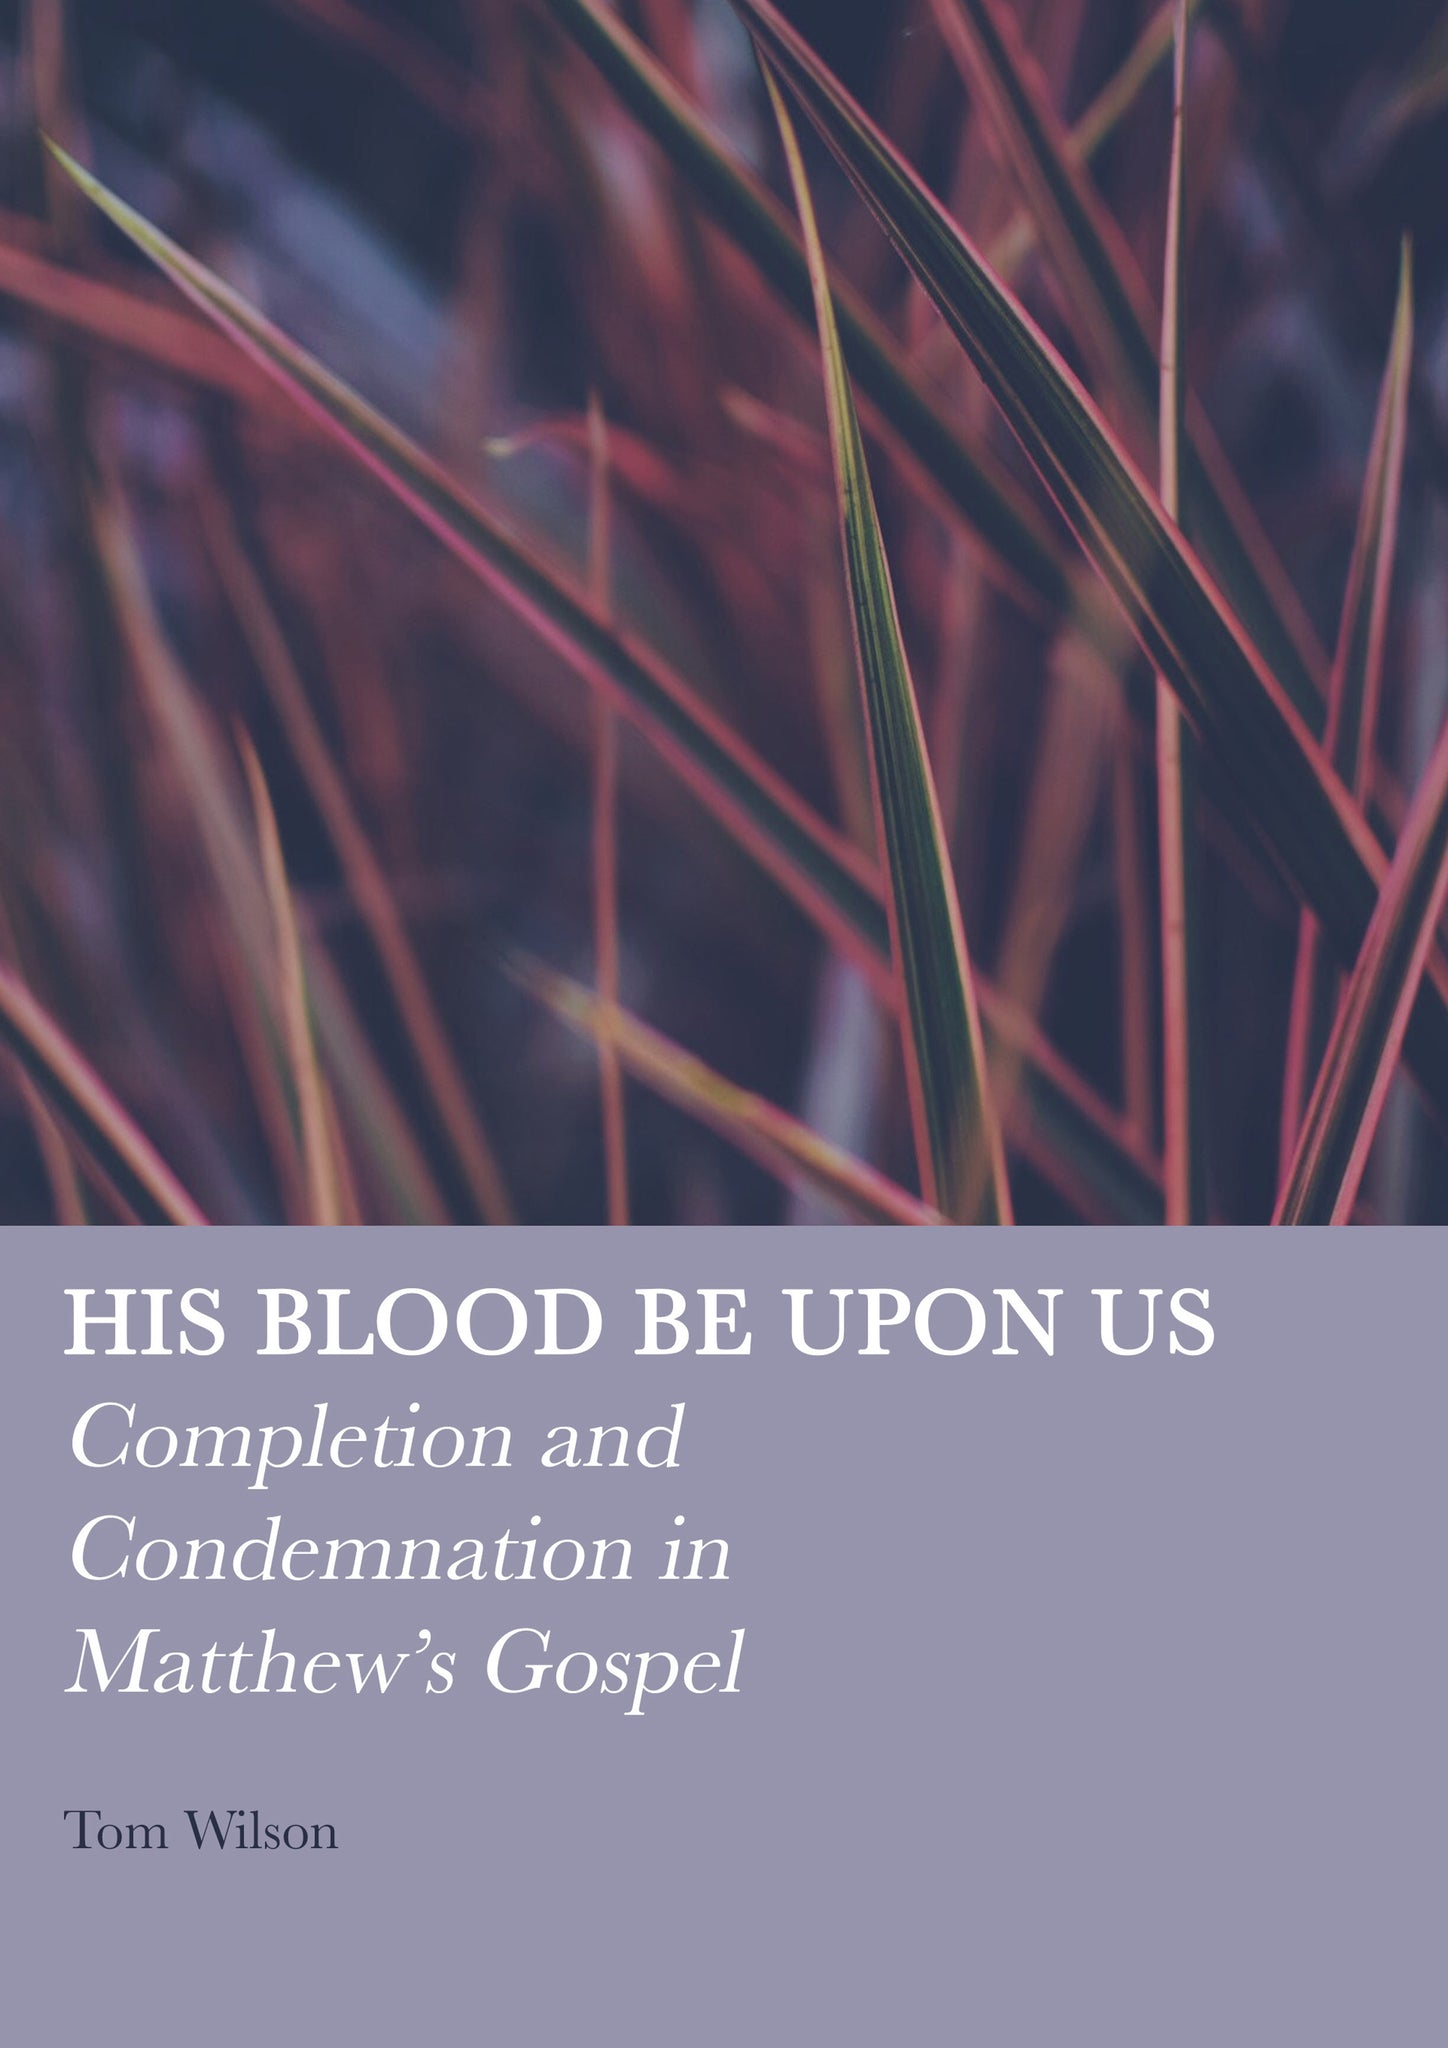 His Blood be Upon Us: Completion and Condemnation in Matthew’s Gospel